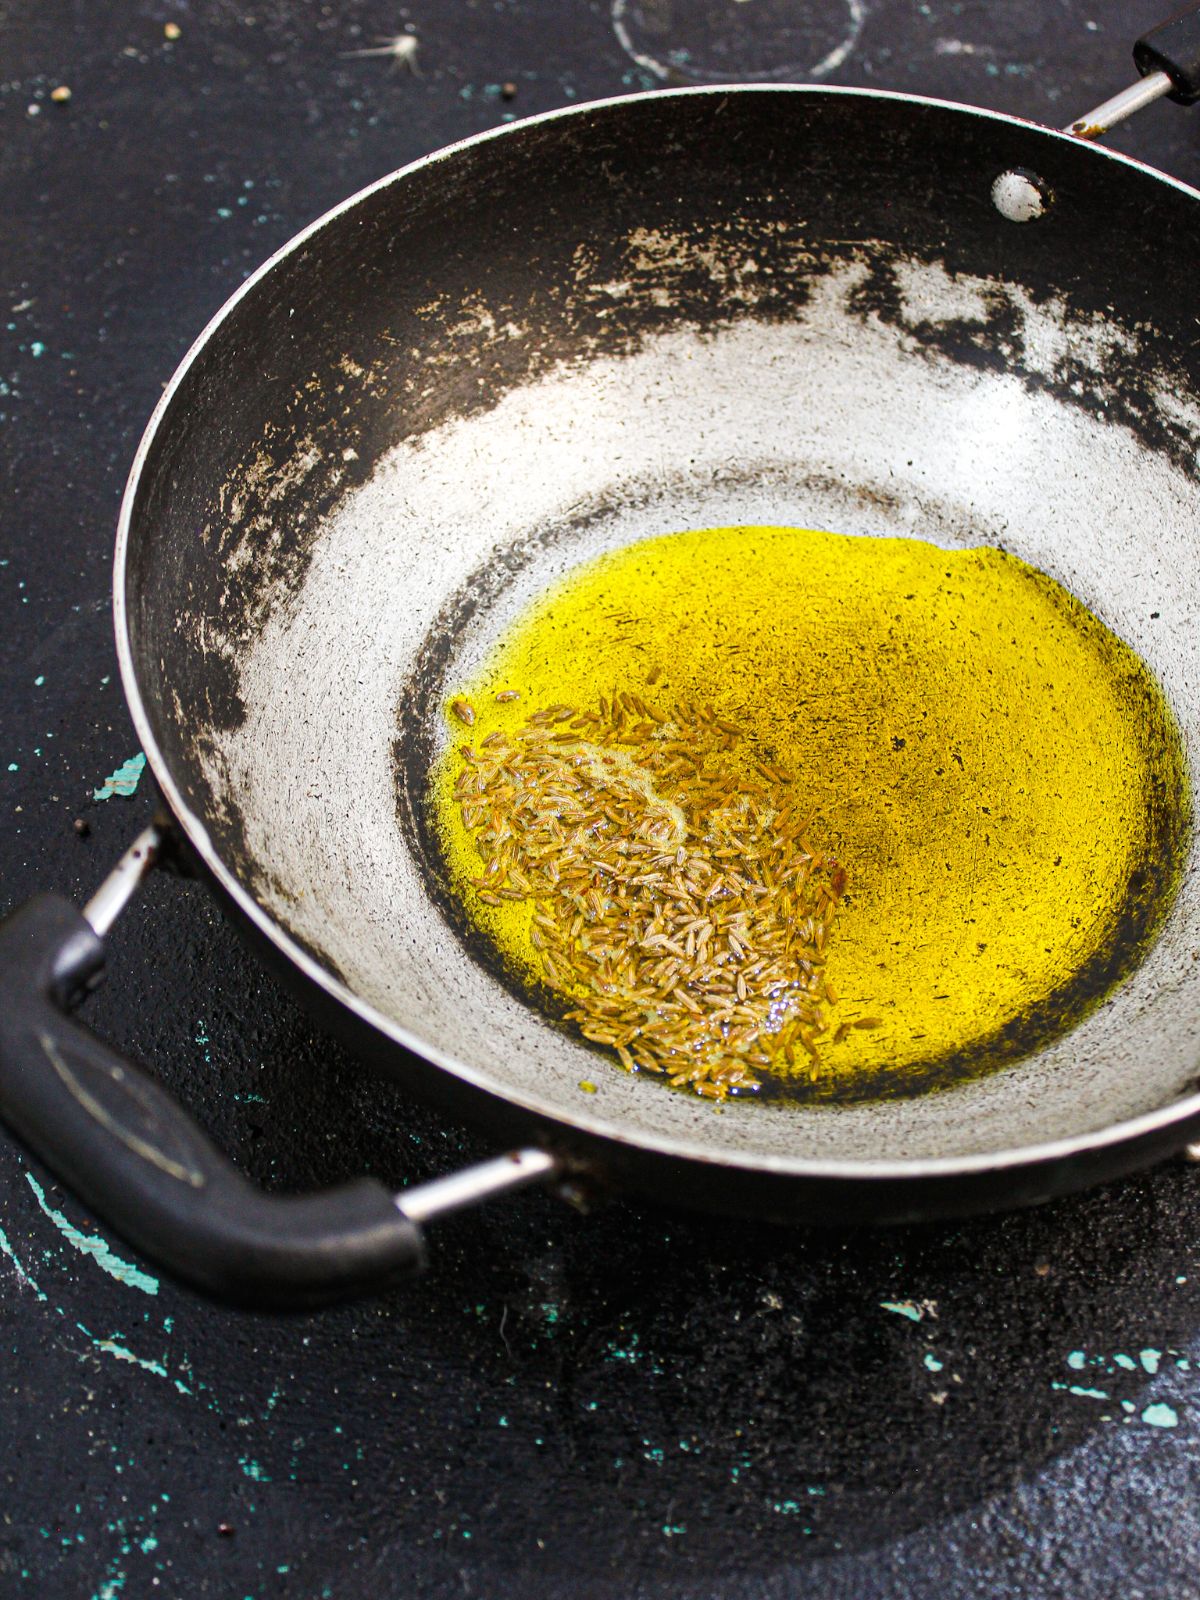 skillet with oil and aromatics